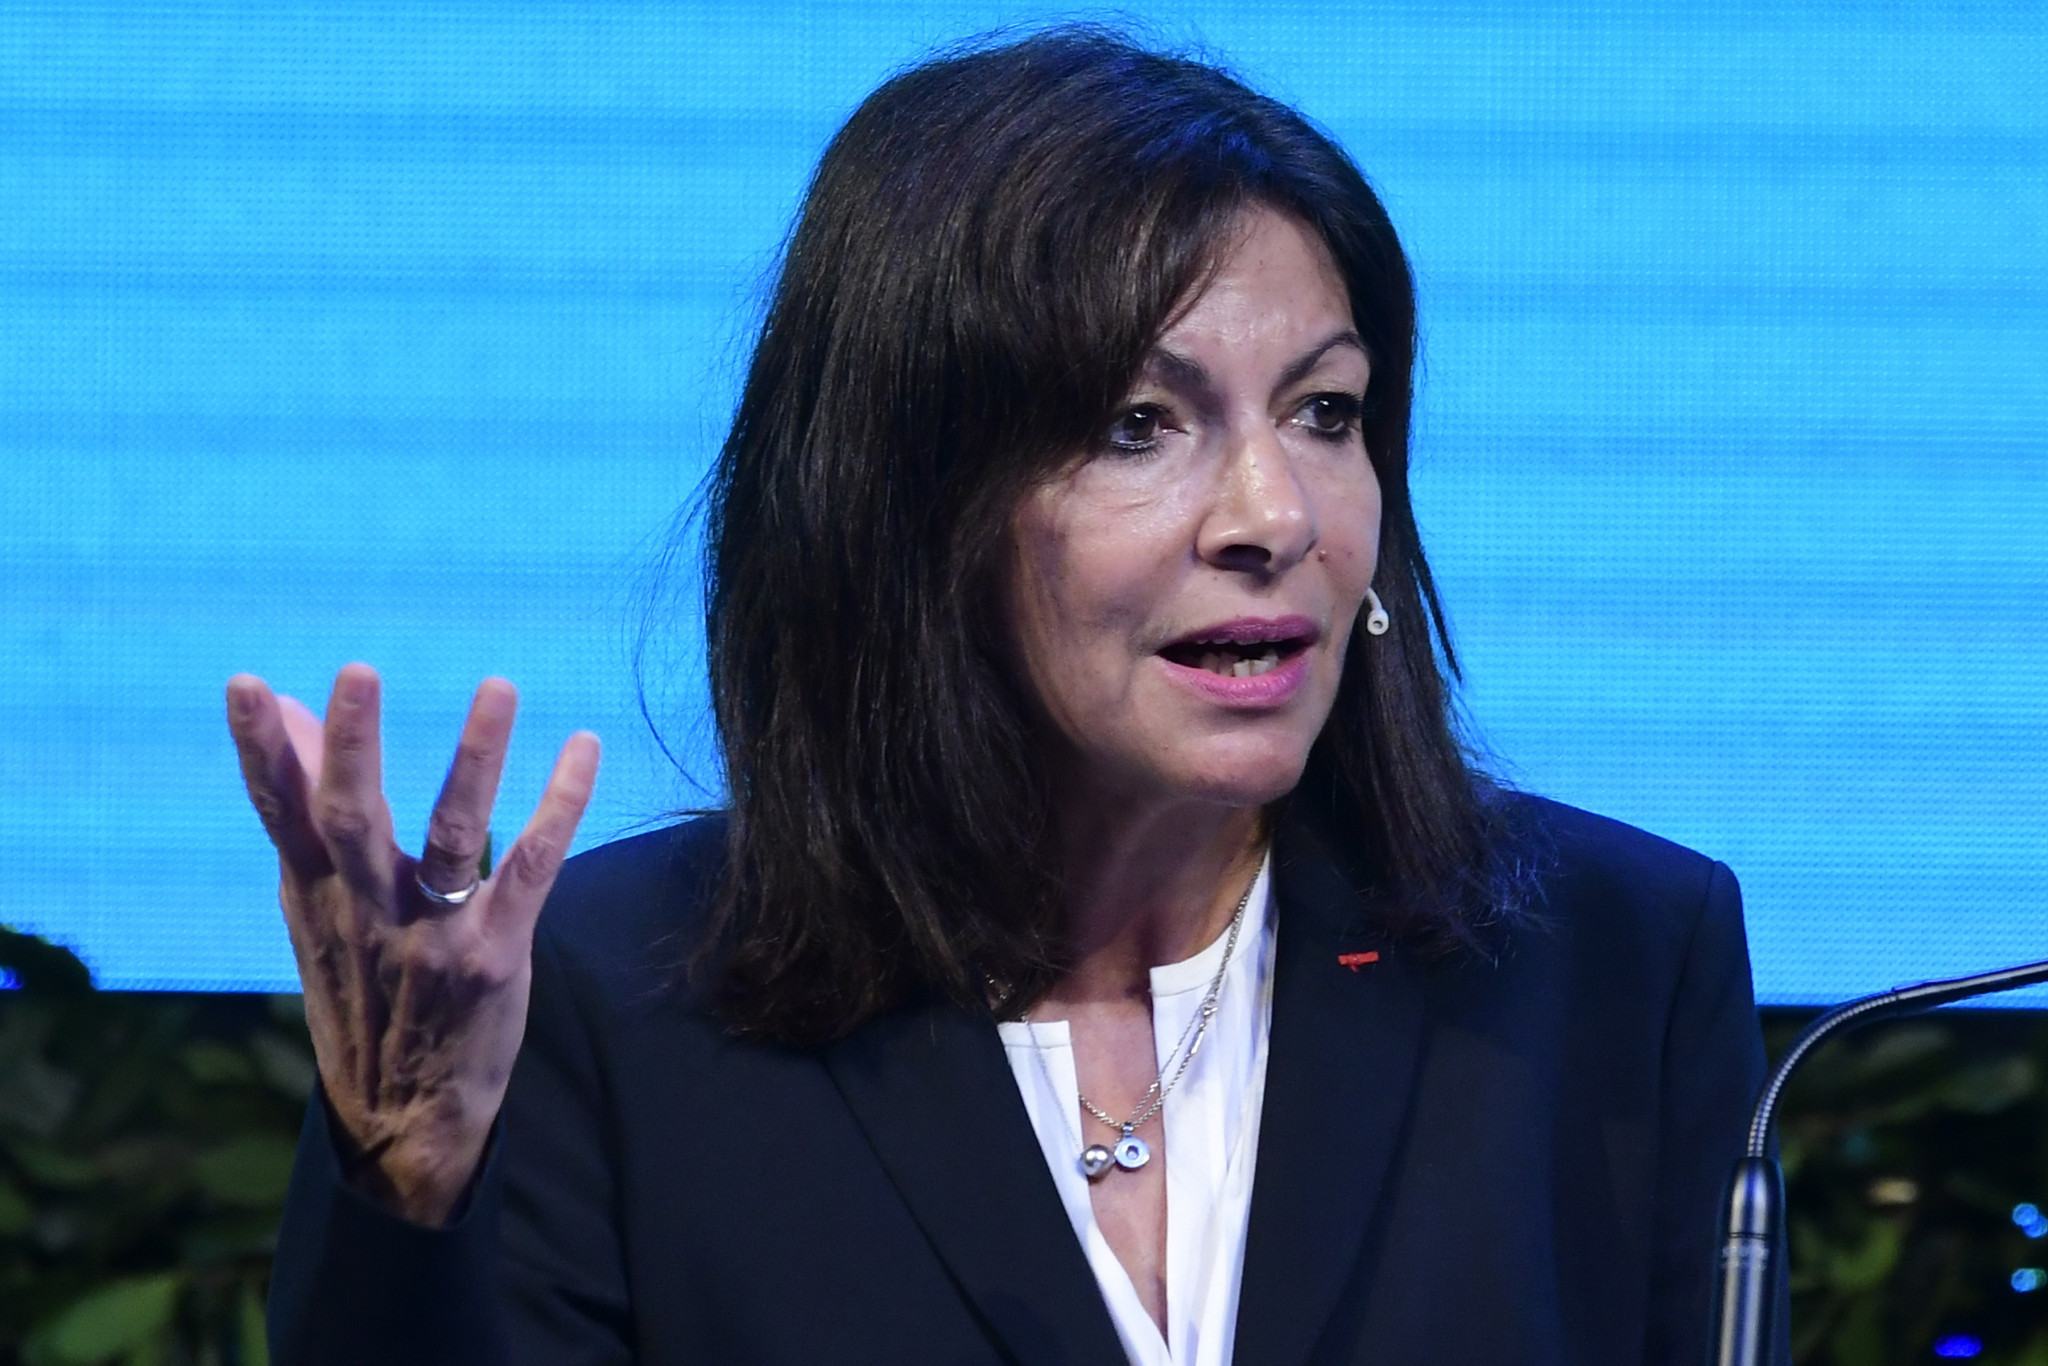 Paris Mayor Hidalgo says she does not want Russian delegation at 2024 Olympics while war continues